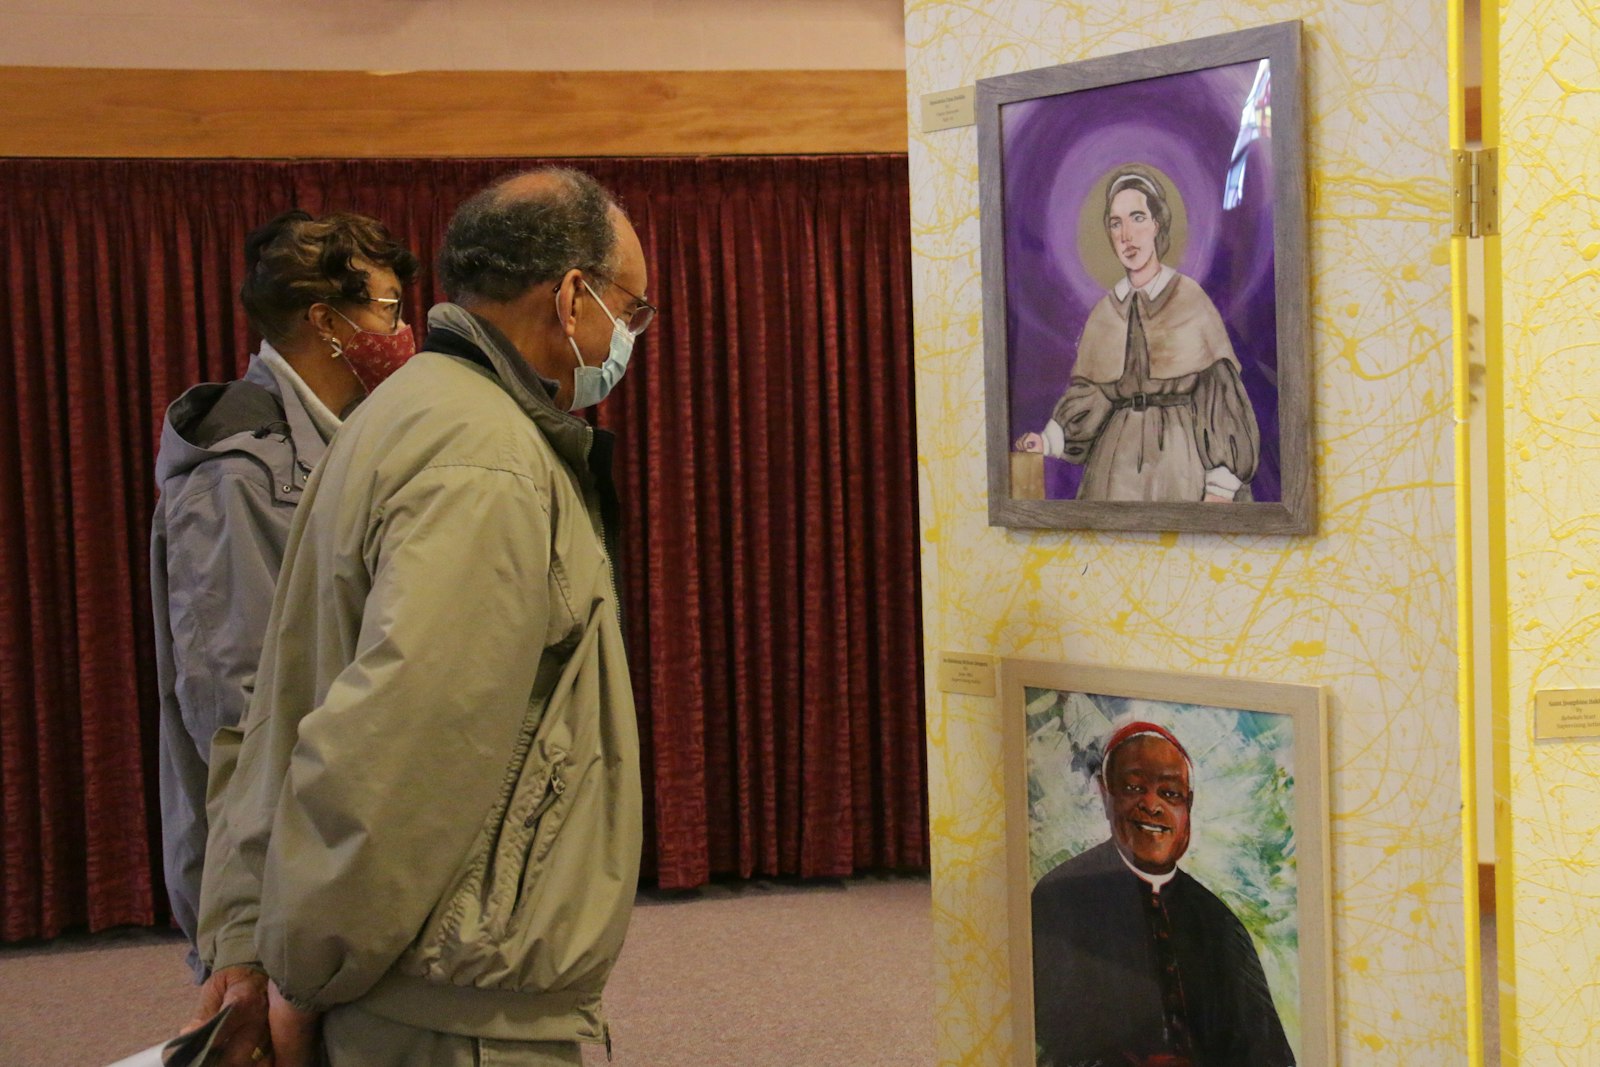 Auxiliary Bishop Gerard W. Battersby announced the works of art on display at St. Suzanne/Our Lady of Gate Heaven will make up a traveling exhibit available to parishes throughout the Archdiocese of Detroit to promote more Black representation in sacred art and to spark conversations about race and racial relations in the local Church.